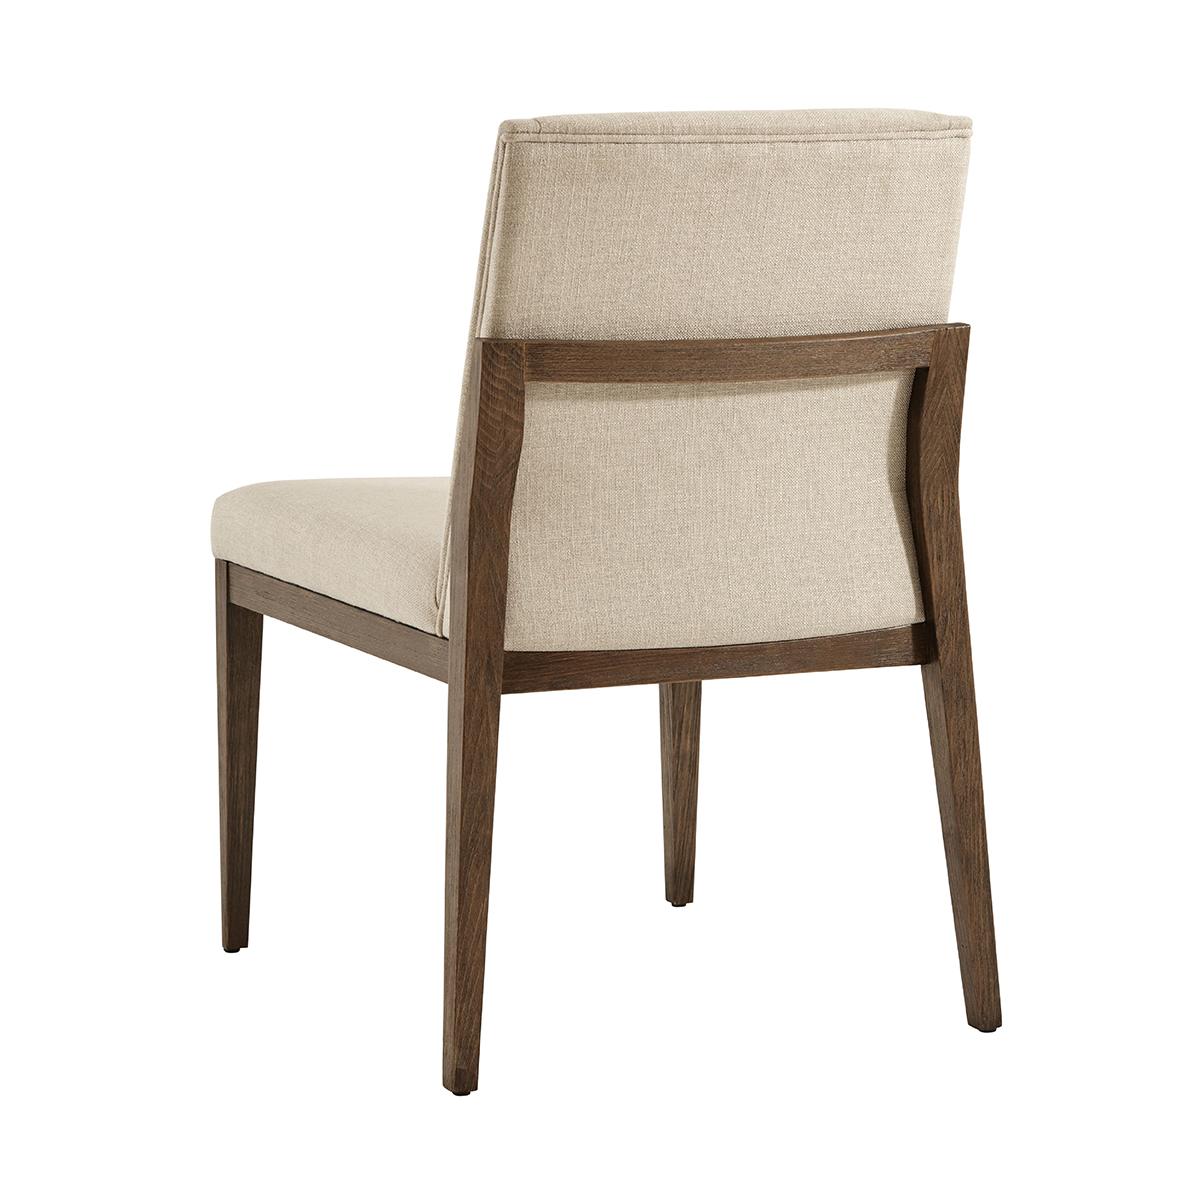 Modern upholstered dining side chair, the brushed beech wood finished in our charteris finish, with an upholstered backrest and bowed seat. Raised on square tapered and out flaring legs. Upholstery is a stain-resistant performance fabric.

Draper